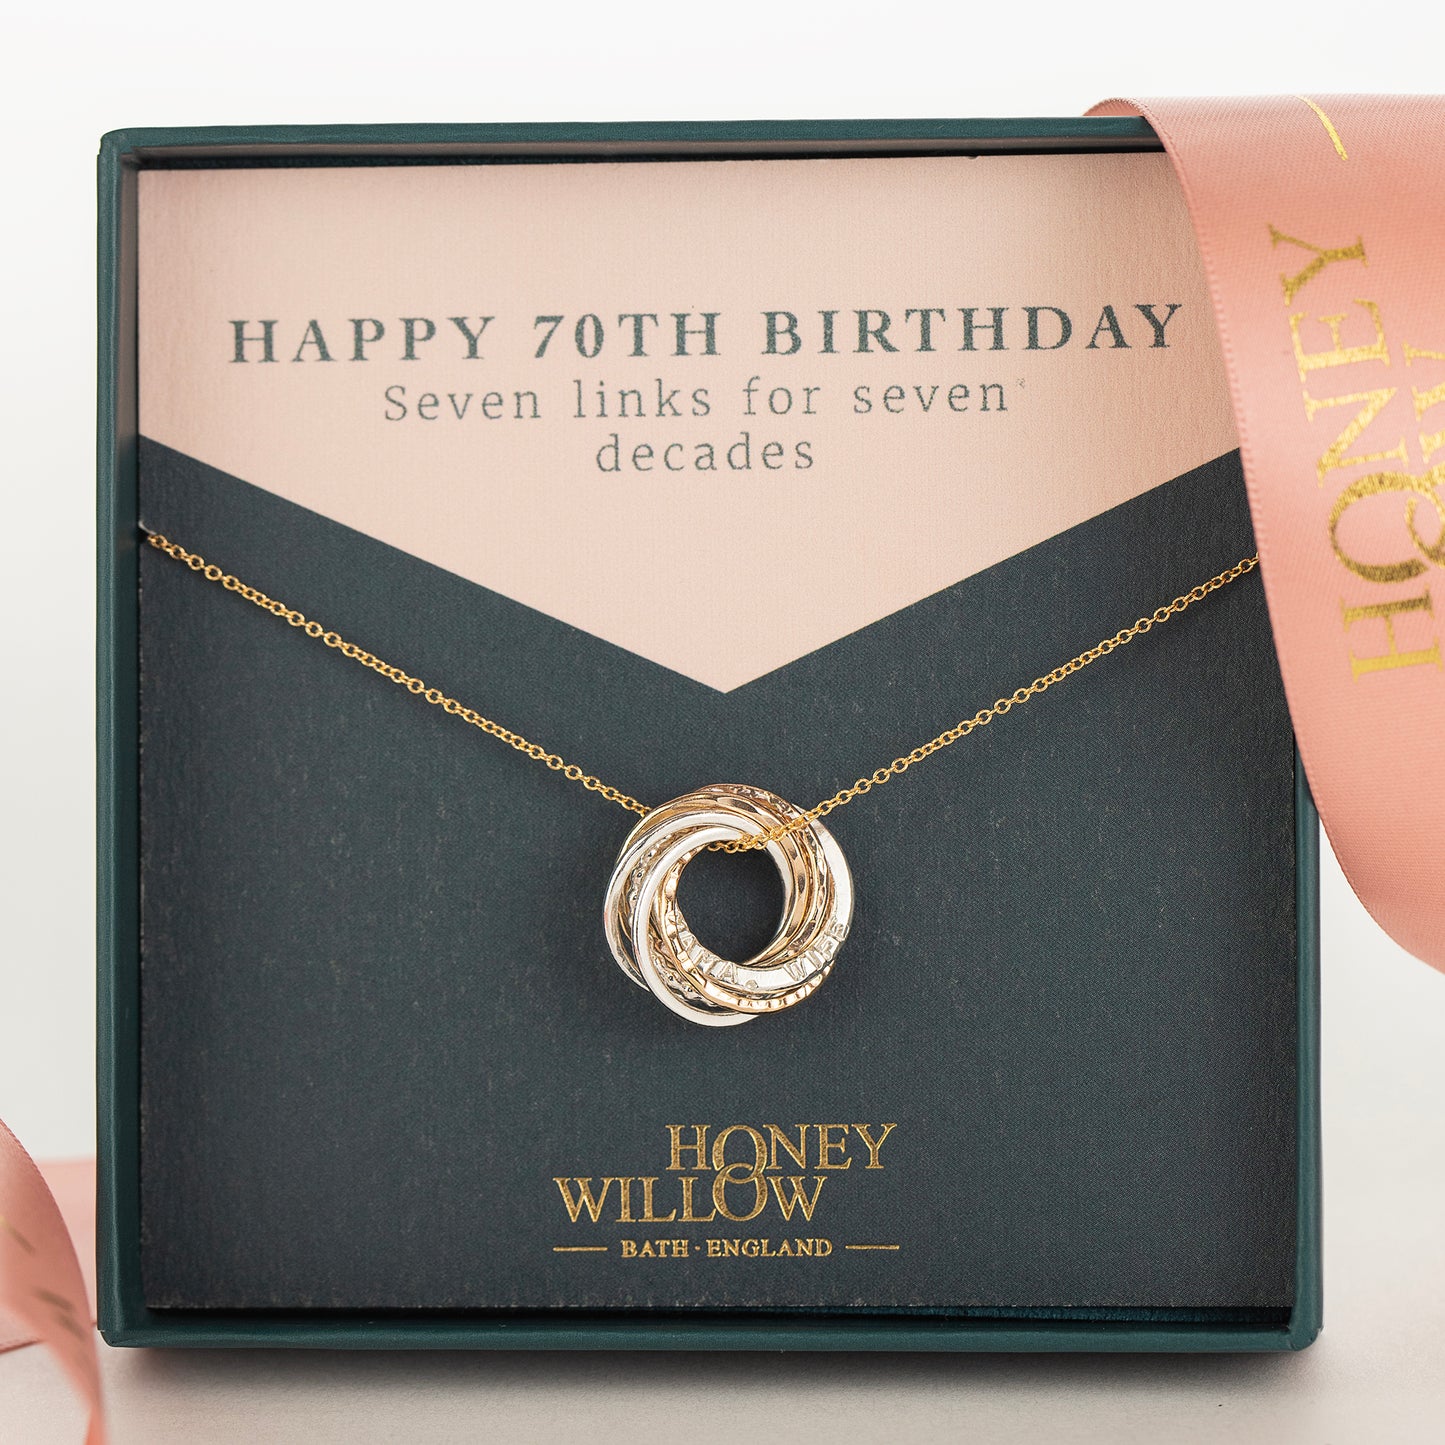 Personalised 70th Birthday Necklace - The Original 7 Links for 7 Decades Necklace - Petite Silver & Gold